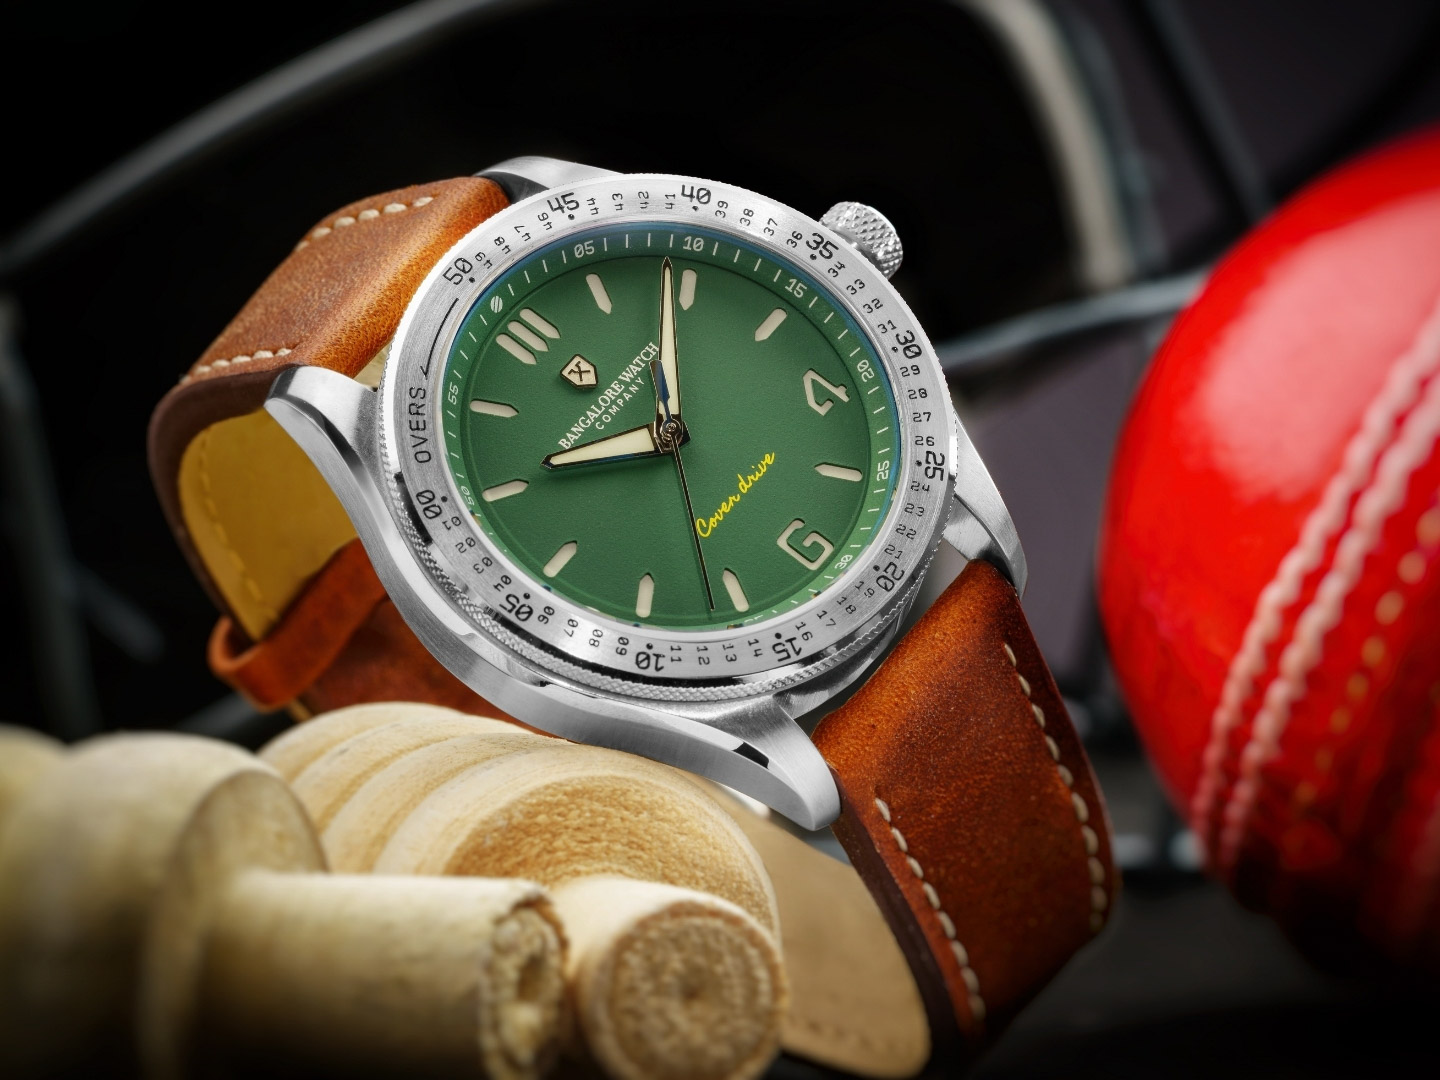 Bangalore Watch Company Cover Drive Cricket-Inspired Timepiece Debut